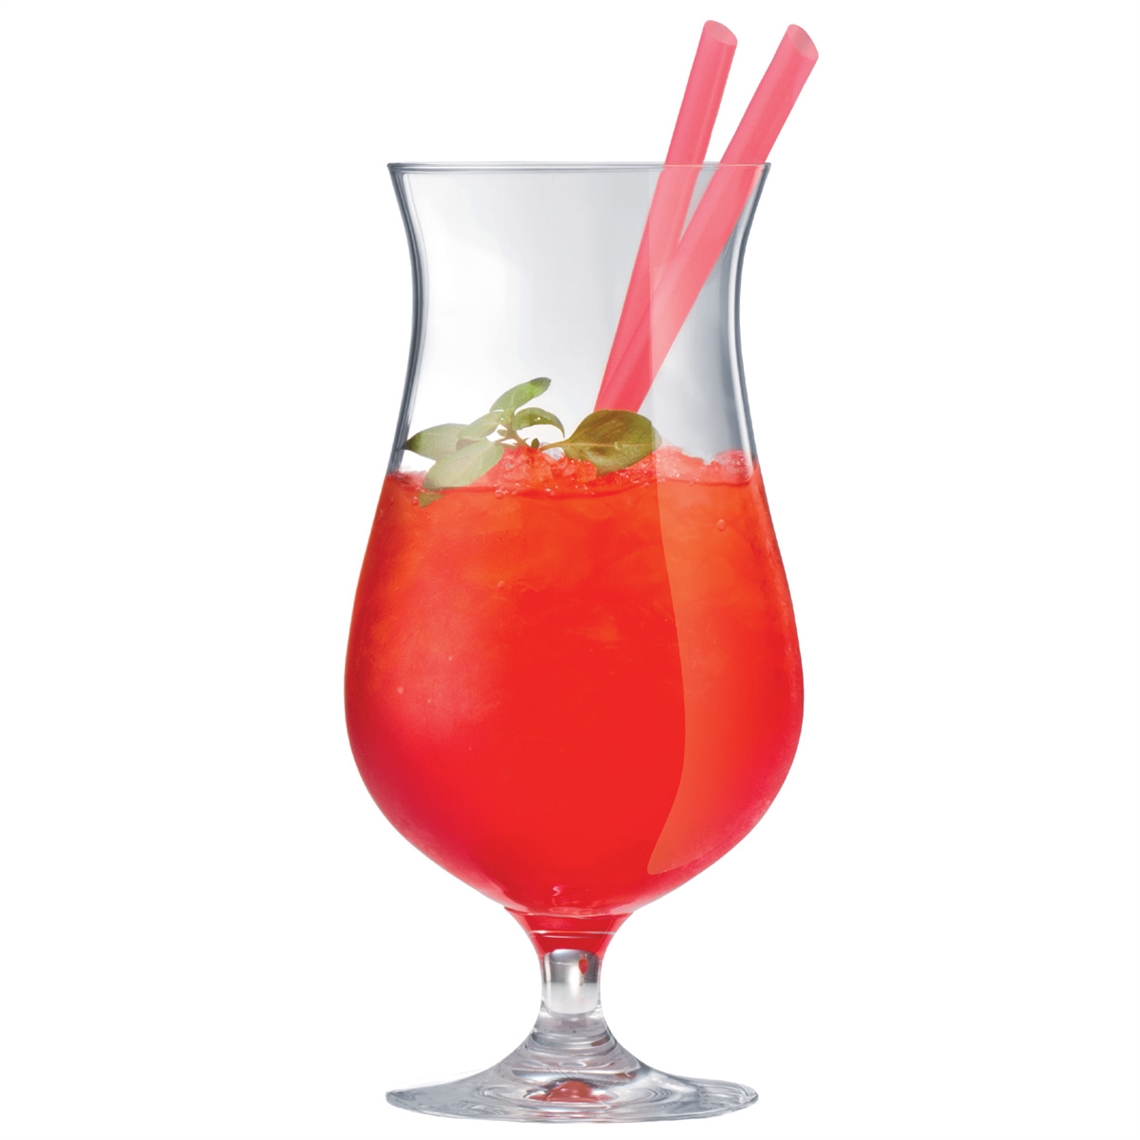 View more pure from our Cocktail Glasses range